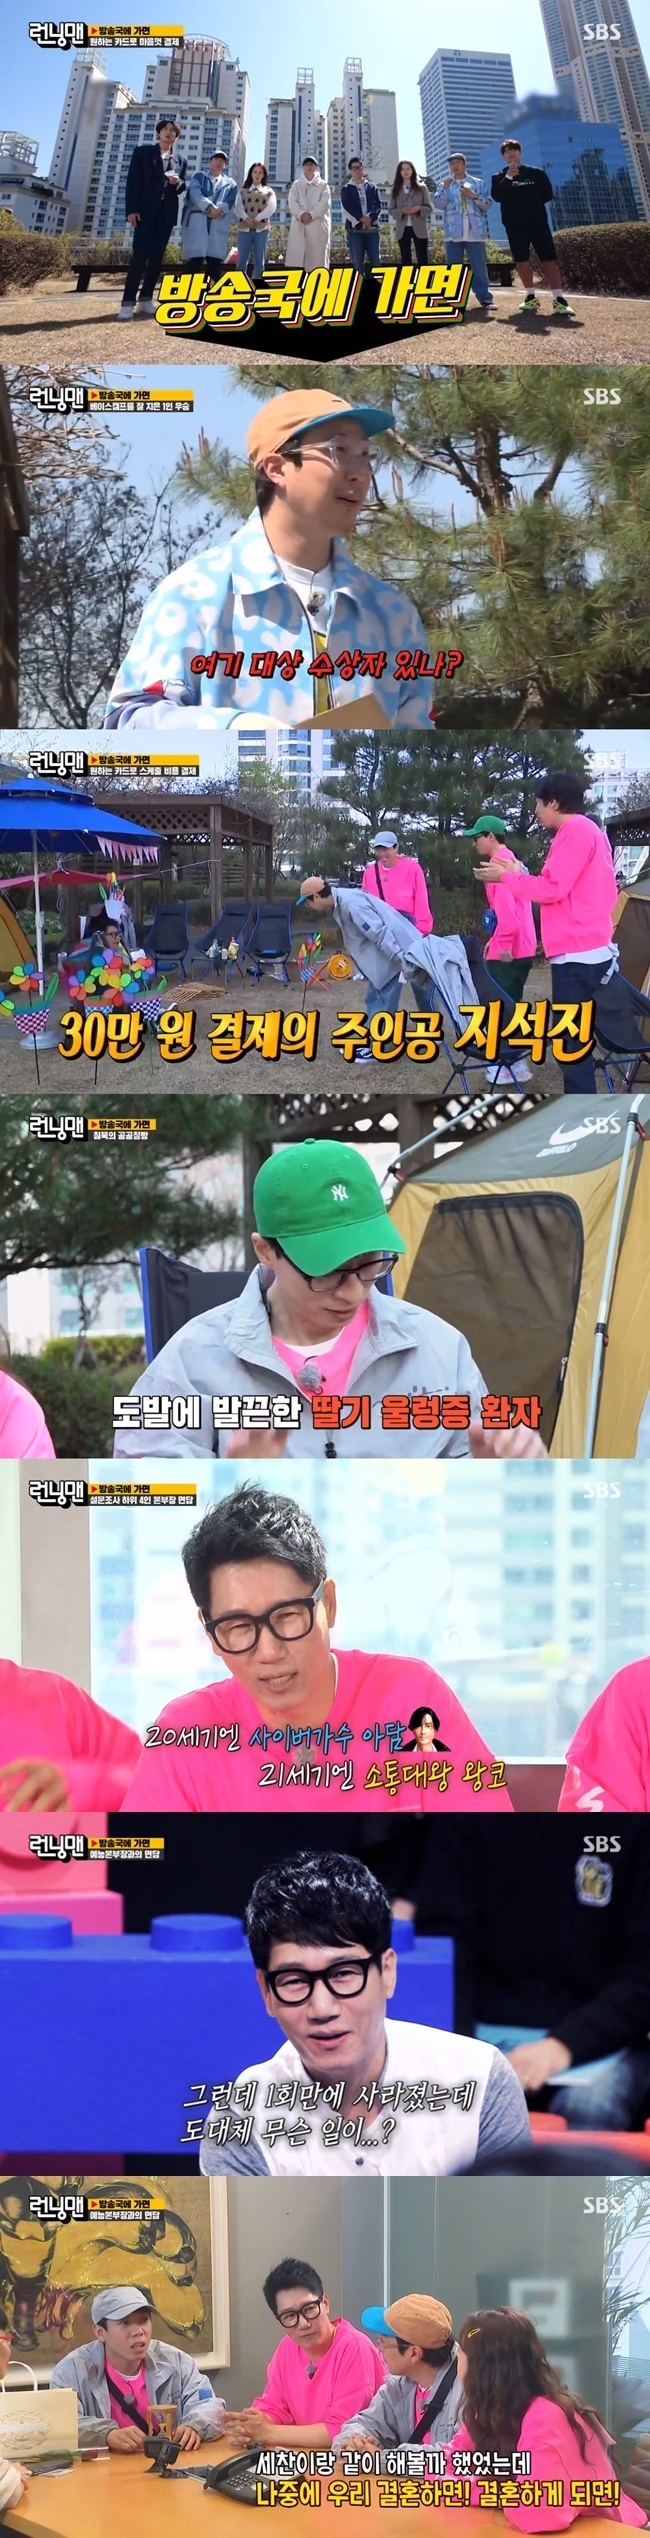 I dont do it (Running Man)Choi Young-in, general manager of SBS Entertainment, Disclosure the whole of Ji Suk-jins Same Bed, Different Dreams 21.On SBS Running Man broadcasted on May 9, Go to the broadcasting station Race was held to digest various entertainment program schedules in the broadcasting station.On the day of the arrival, the members submitted their personal card, and the crew gave the members the opportunity to randomly select the card and pay as much as they wanted.Jeon So-min gave the staff a flex with the main PD Card; the second batter Song Ji-hyo also Choices the main PD Card.Members gathered in one place started the Go to the station Race, all costs incurred in the Race pay with Card.A winning member in the mission has the right to decide on payment and Choices Card; if you pay only with the main PD Card, you get the power product and there is only one penalty.The penalty is determined by the bead rolling race, but the member who Choices the PD Card adds one penalty bead to me.If you Choice the Card of another member, one of your beads will be deducted, and a penalty bead will be added to the owner of the card.The first game was to build a Jungles Law base camp; among the members split into two teams, Yoo Jae-Suk and Kim Jong-kook teamed up.Yoo Jae-Suk then provoked Ji Suk-jin, saying, Do you have a grand prize winner on that team?, which Ji Suk-jin refuted as I am a vaccinator.Kim Jong-kook laughed, I congratulate you very much. Yang Se-chan was considered the first missions biggest contributor and took the card decision.The owner of Card was Ji Suk-jin.The second game was the alley restaurant strawberry game, the biggest weakness of Yoo Jae-Suk; as expected, Yoo Jae-Suk was attacked by members and failed in succession.The members issued the Yoo Jae-Suk ban, but immediately attacked again and Yoo Jae-Suk was humiliated.First-place Kim Jong-kook scored Lee Kwang-soo Card and second-placed Jeon So-min scored Ji Suk-jin Card Choices.The third game was The Deacons of the Deacons, which was voted by fans through live broadcasts. When Song Ji-hyo was ranked as the number one player in the reversal, the members responded, Is it popular vote?Song Ji-hyo Choices Kim Jong-kooks CardThe bottom four were met with Jeon So-min, Haha, Yang Se-chan, and Ji Suk-jin with Choi Young-in, head of the entertainment department.In particular, Choi Young-in is known as a hit maker who made big entertainment such as Truth Game, Ambition Manman and Healing Camp.I dont know why talking to me is a penalty, thats a bad feeling, Chief Choi Young-in said.Haha called Choi Young-in general manager sister and said, There is no hit.I also sent a long text when I was in a slump, Jeon So-min said, I was so grateful for sending me a fruit basket when I was hospitalized last time. Among them, the past relationship between Ji Suk-jin and Choi Young-in was revealed.Ji Suk-jin had dropped off in the first inning of Same Bed, Different Dreams 2 Season 1.In response, Choi Young-in said, I will not do it.I went to the front of the house three times and said that I should not fall out. Jeon So-min said, I will go to Same Bed, Different Dreams 2 later on when I marriage.Id like to try it with Sechan, Choi Young-in said. You have to come out.